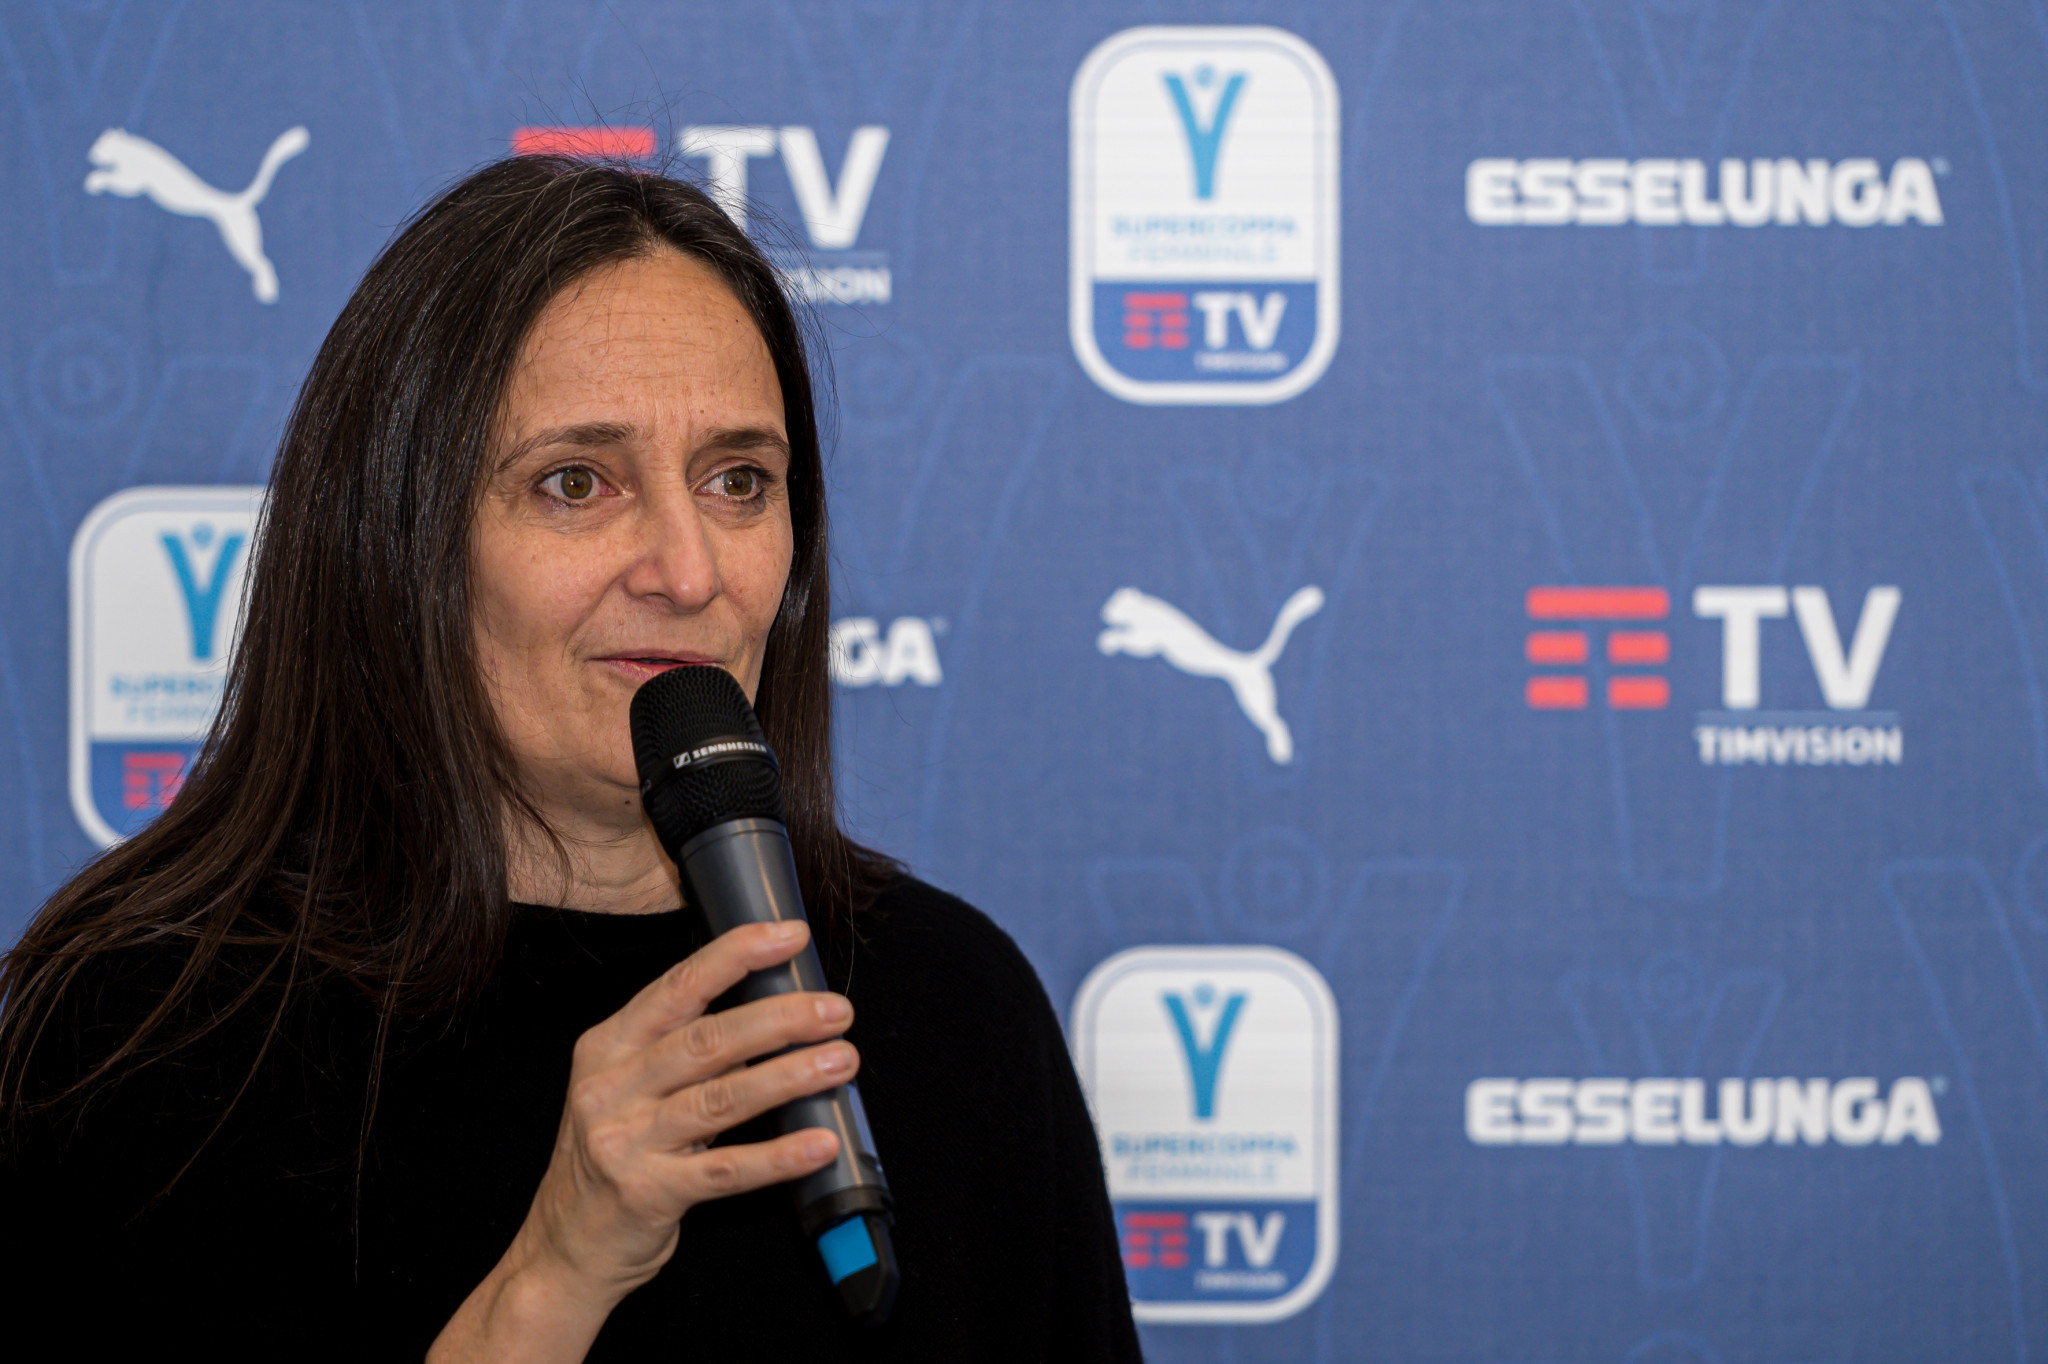 Ludovica Mantovani, President of the Italian Women's Football Division, welcomed the presence of teqball at the Women’s Primavera Championship ©Getty Images